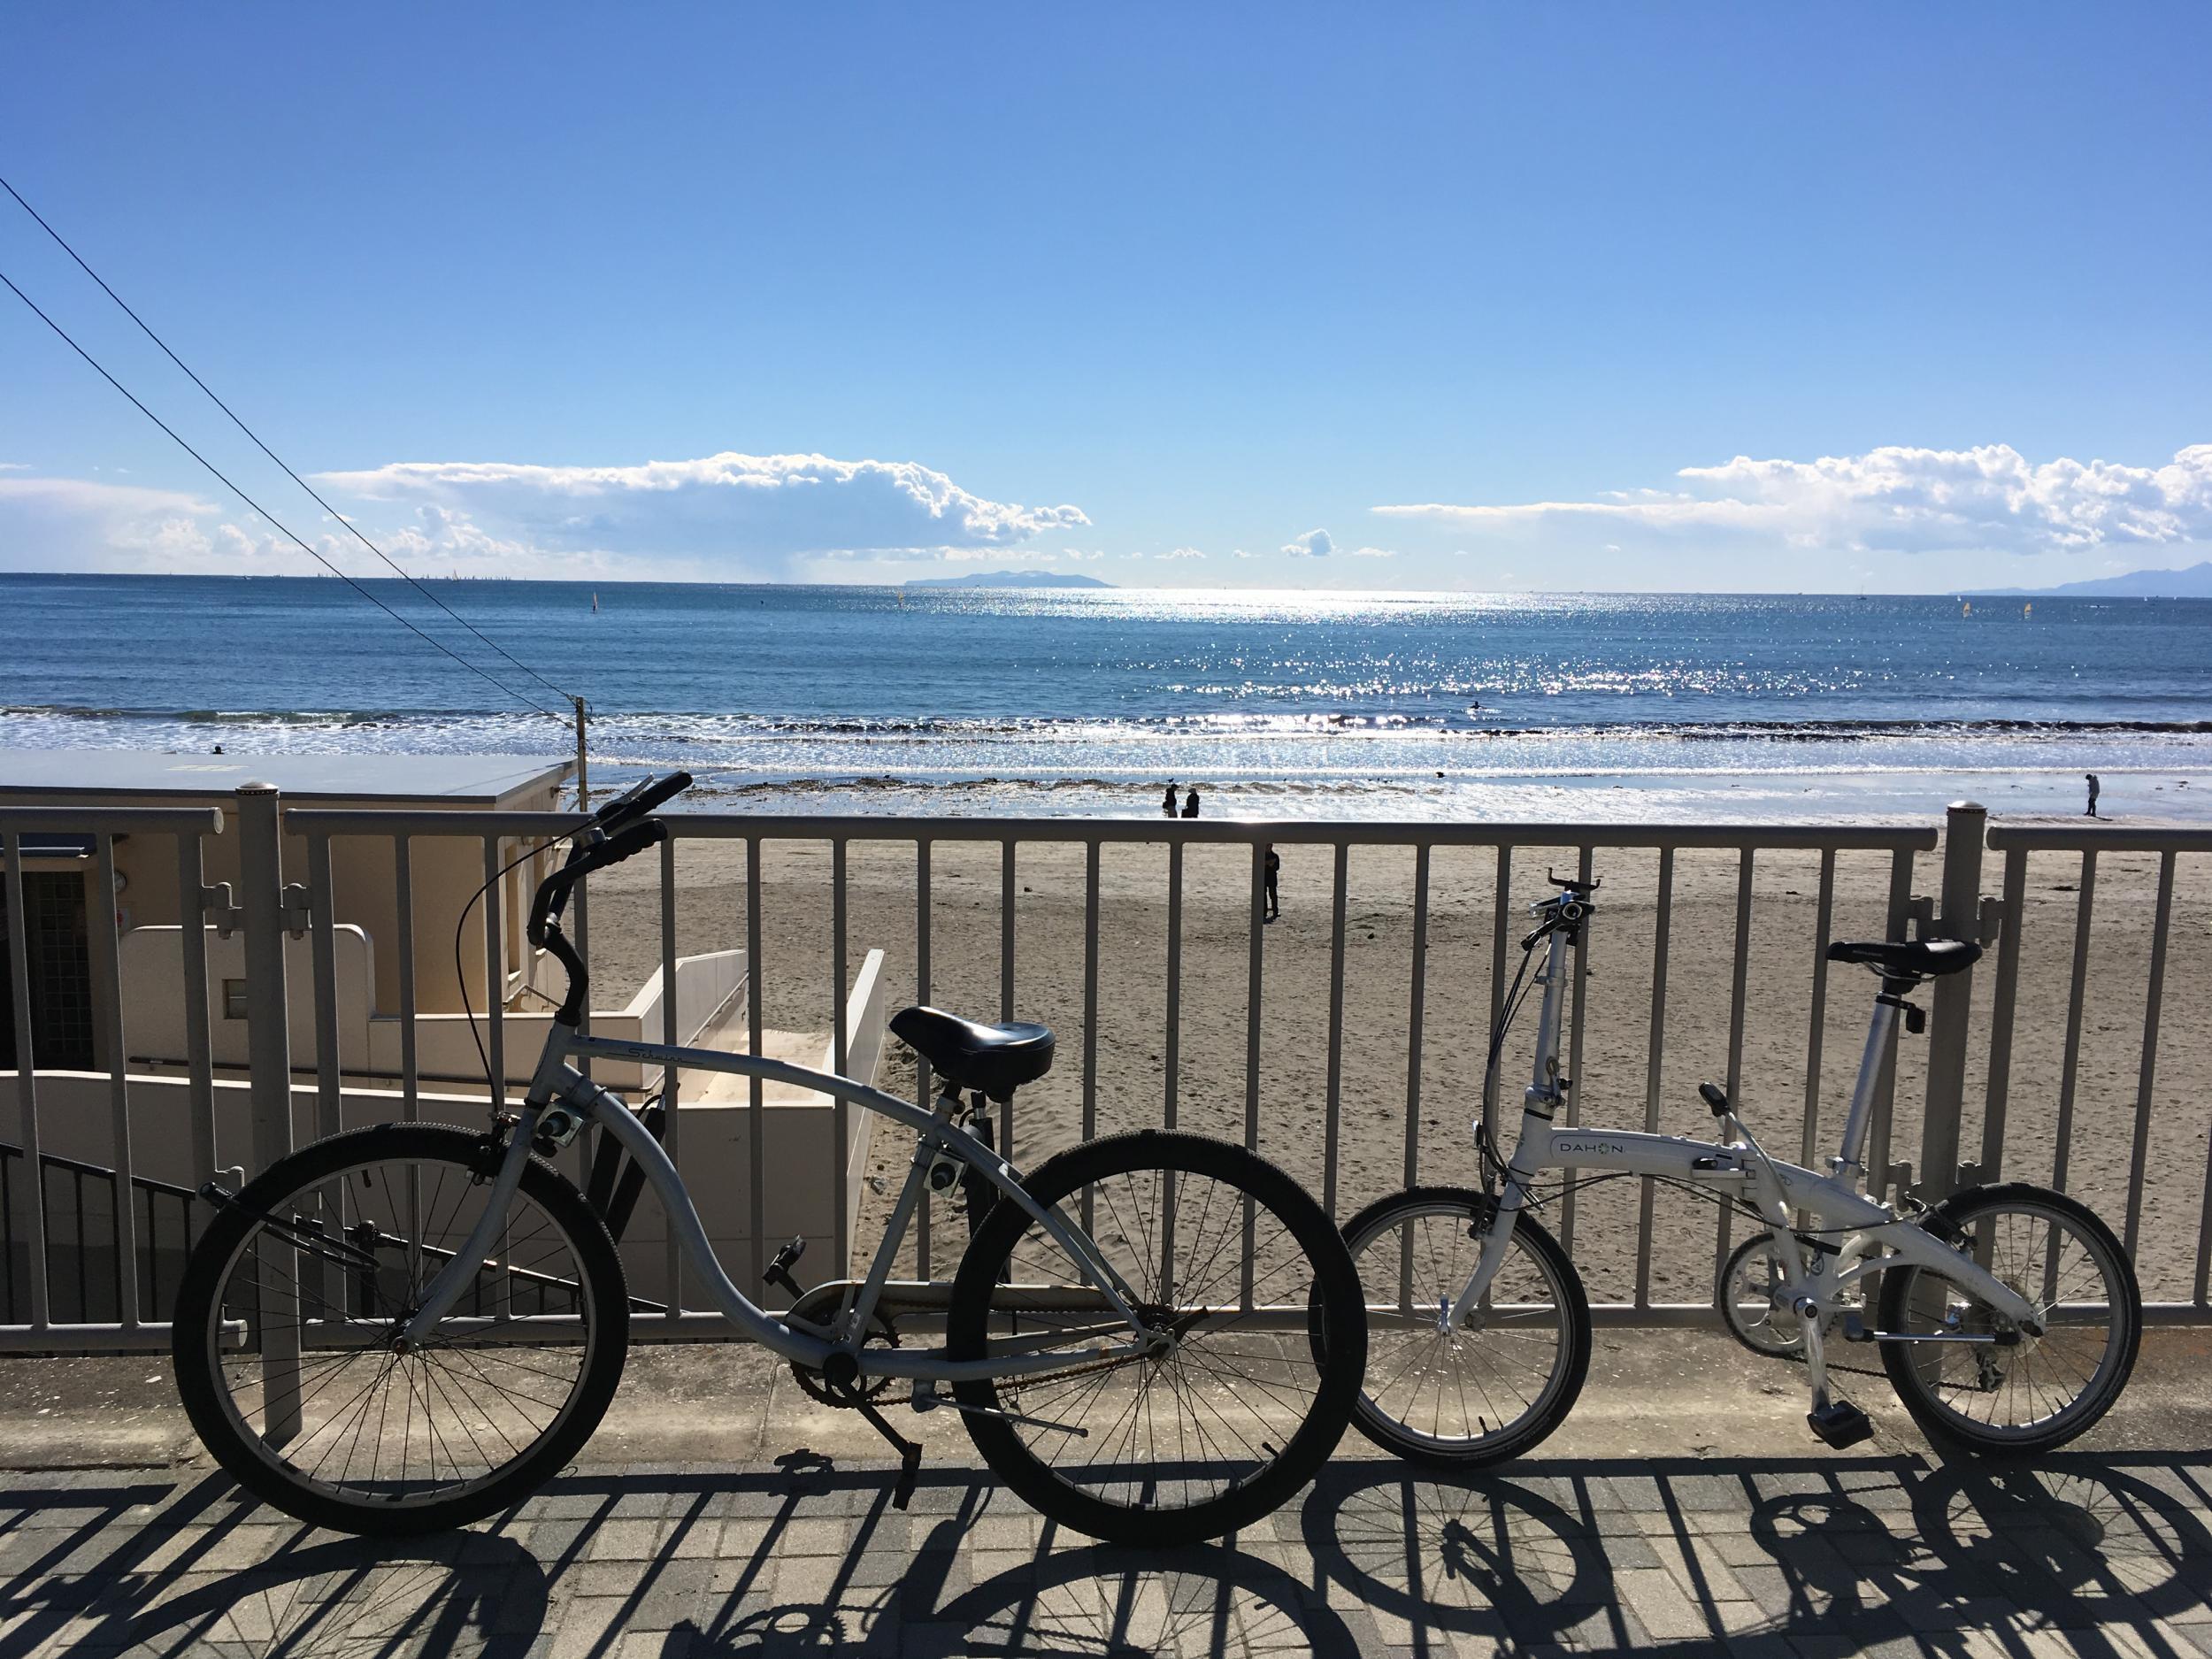 With its bikes and beach, Kamakura could be California (Nicola Trup)